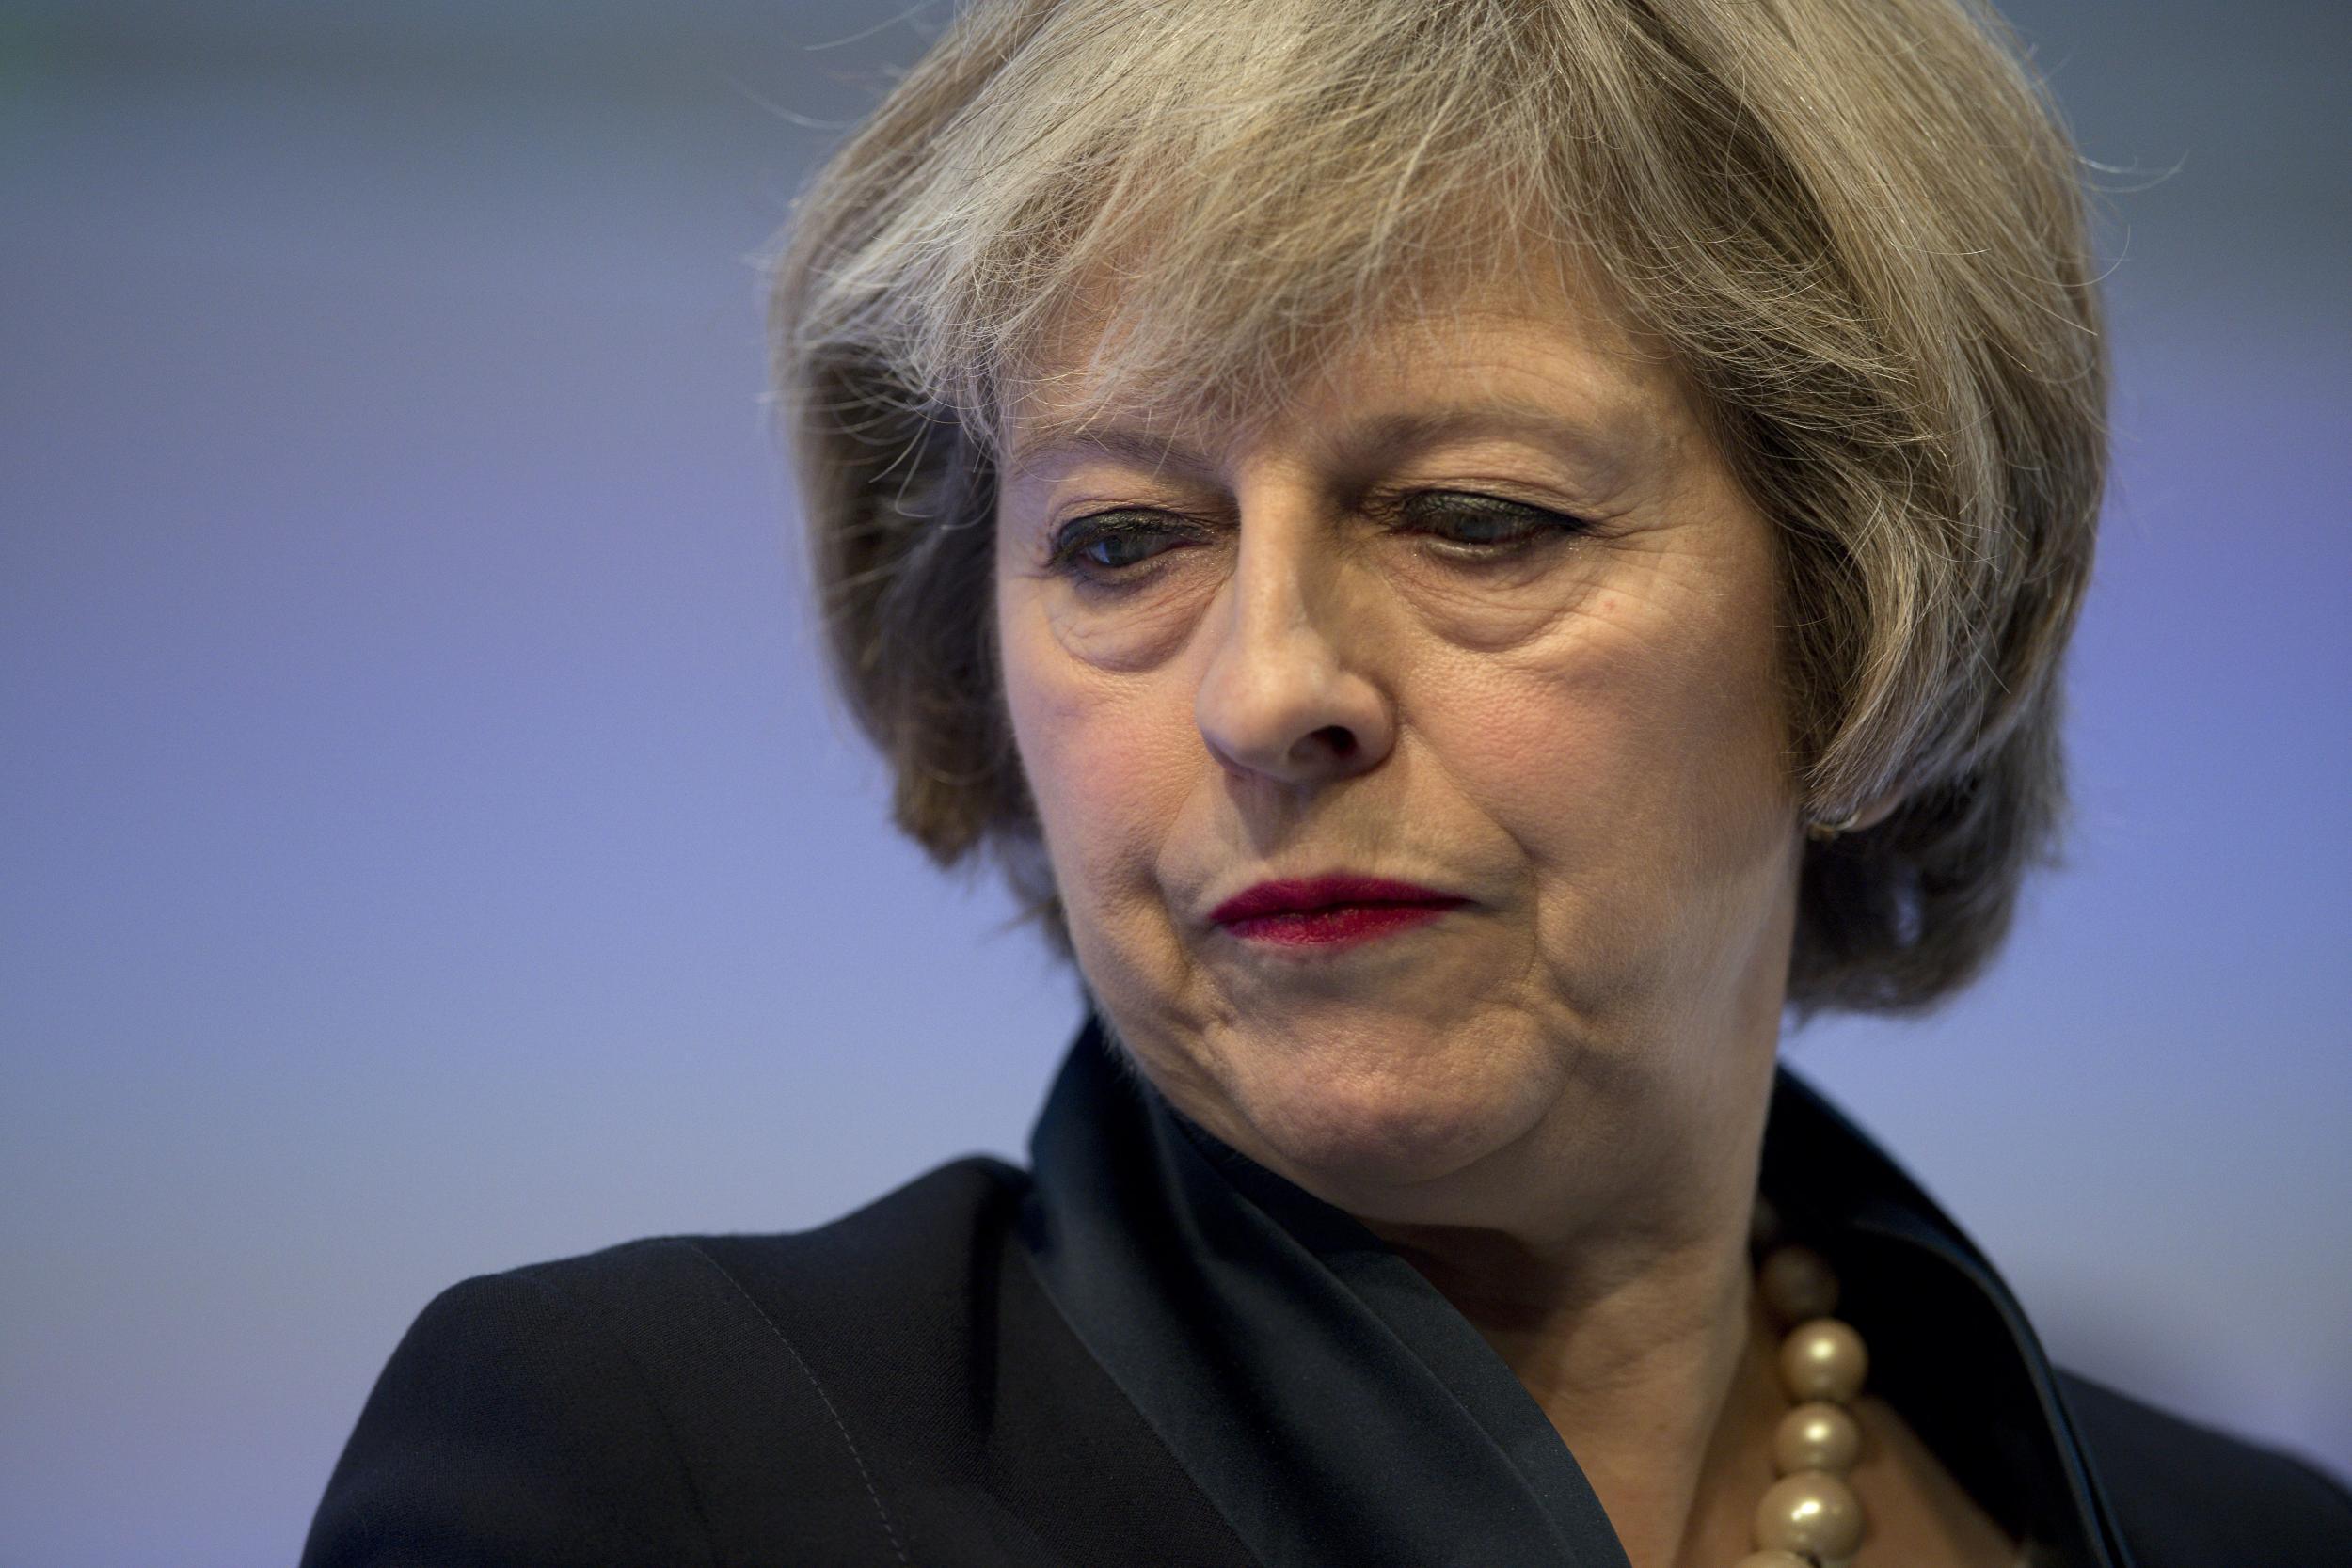 The Prime Minister has been accused of trying to ‘blame children’ for the Government’s failure to reduce immigration